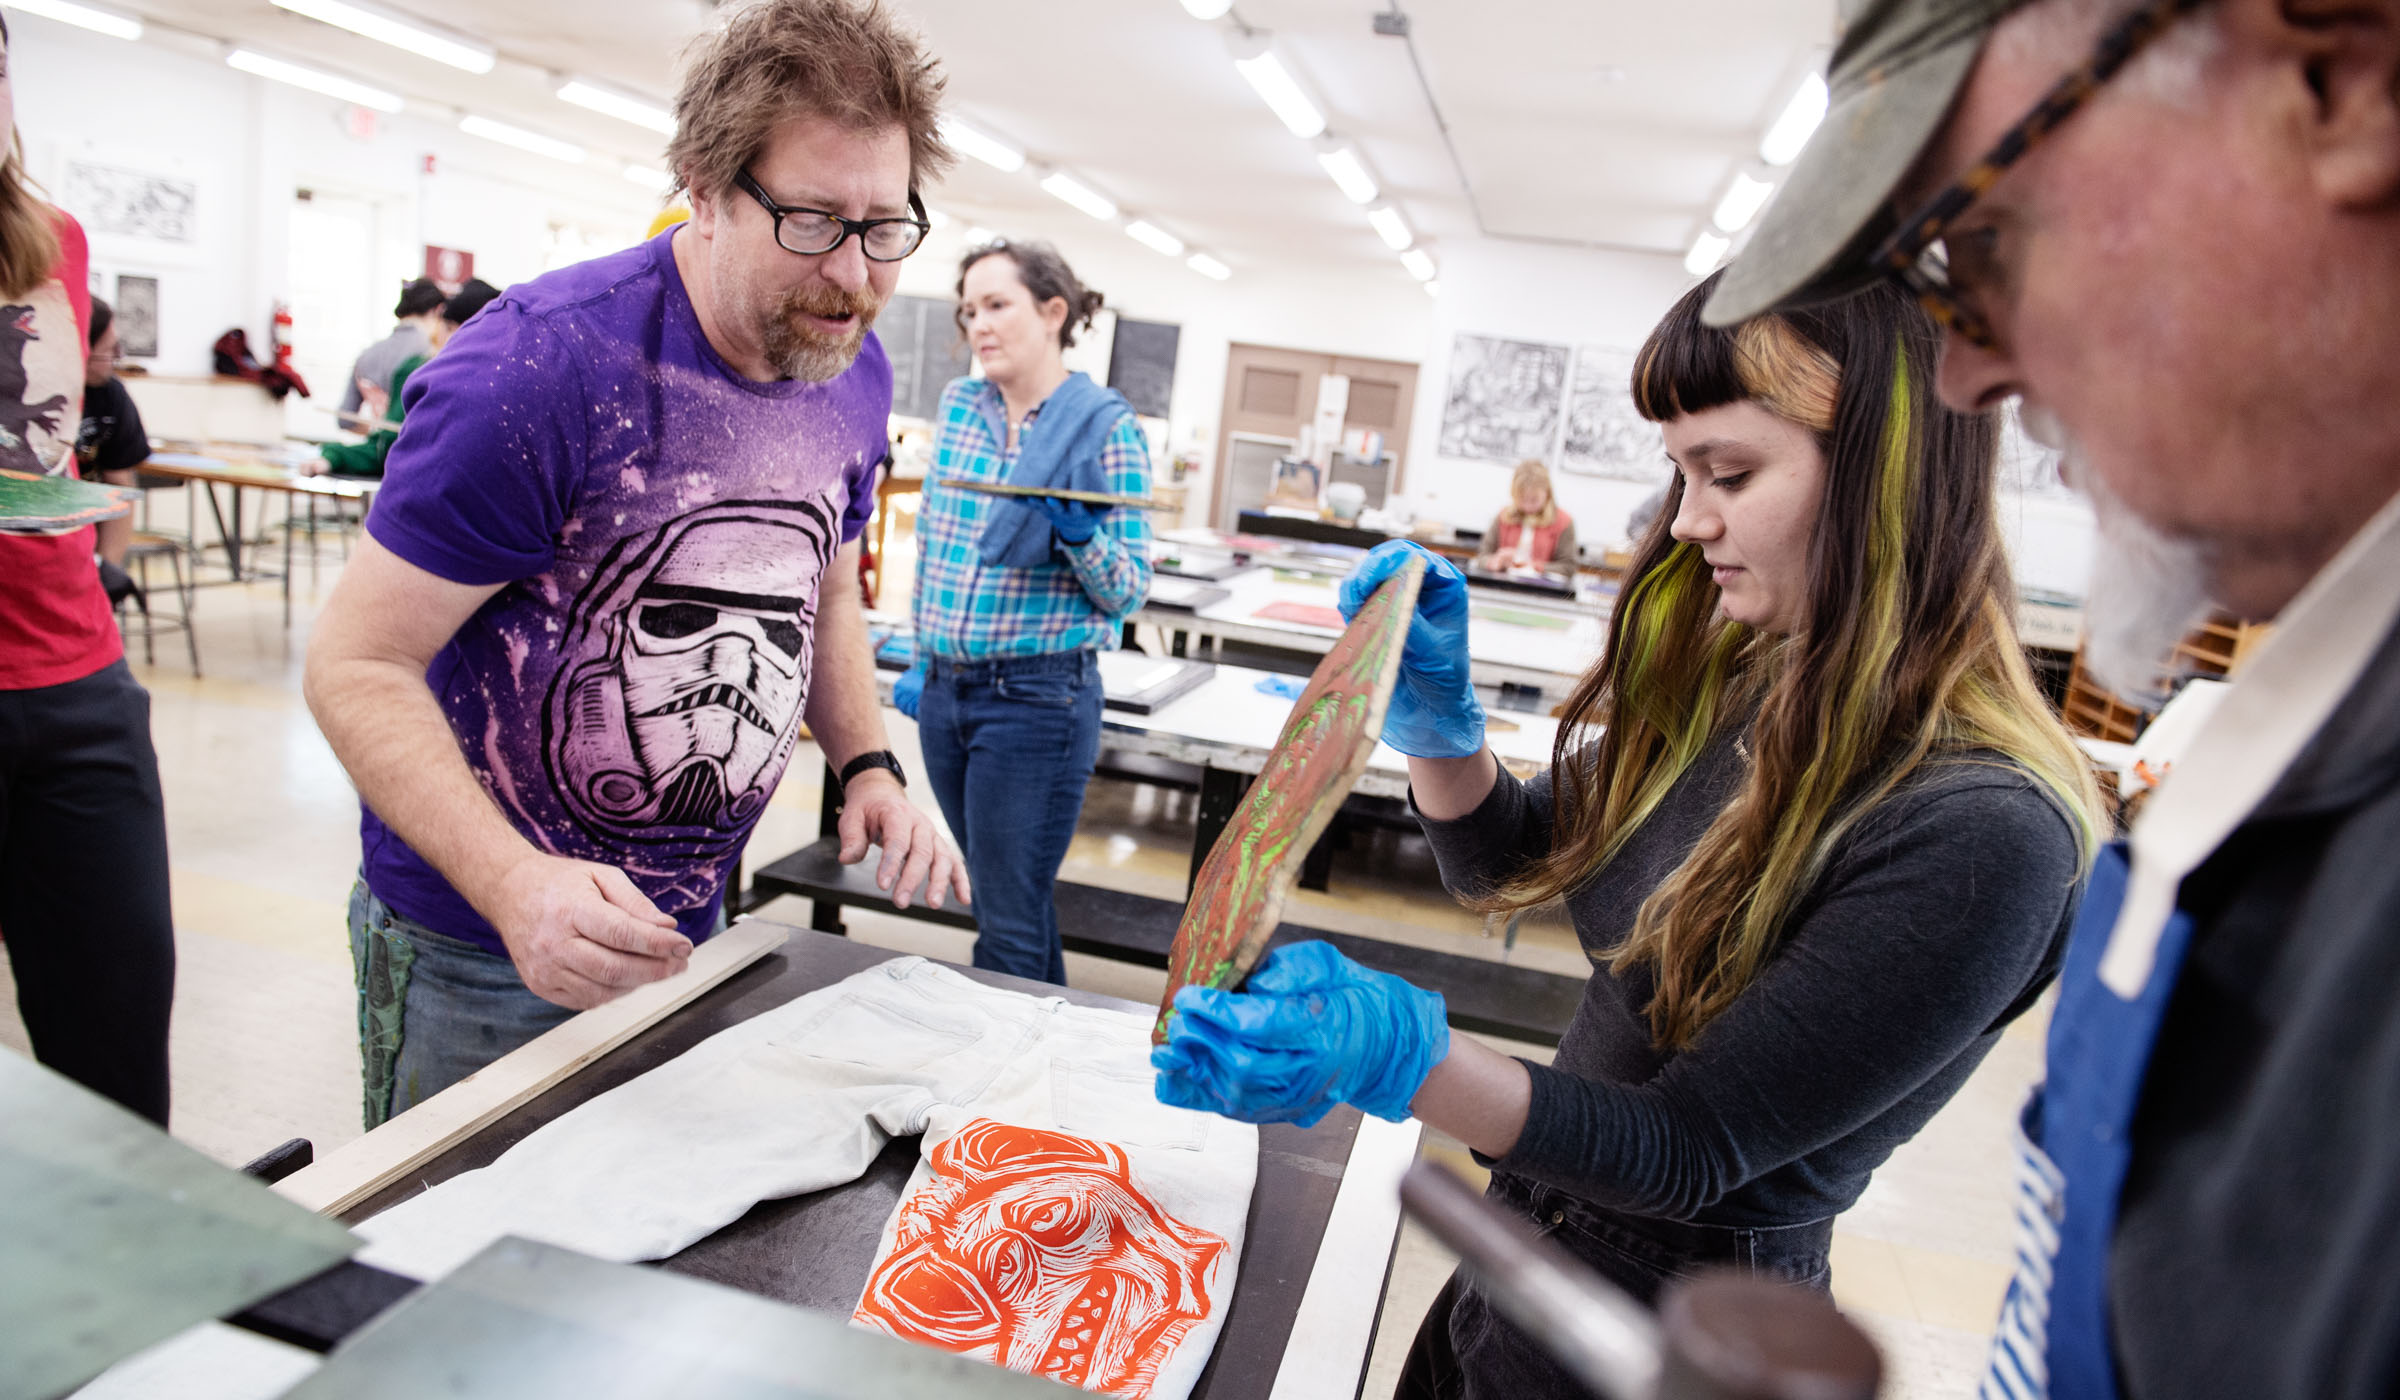 Visiting artist Sean Star Wars at left, wearing a t-shirt printed with one of his Storm Trooper helmet designs supervises Art student Juliet Buckholdt (right) pull an inked plate off, leaving an orange rat design on her pale jeans.